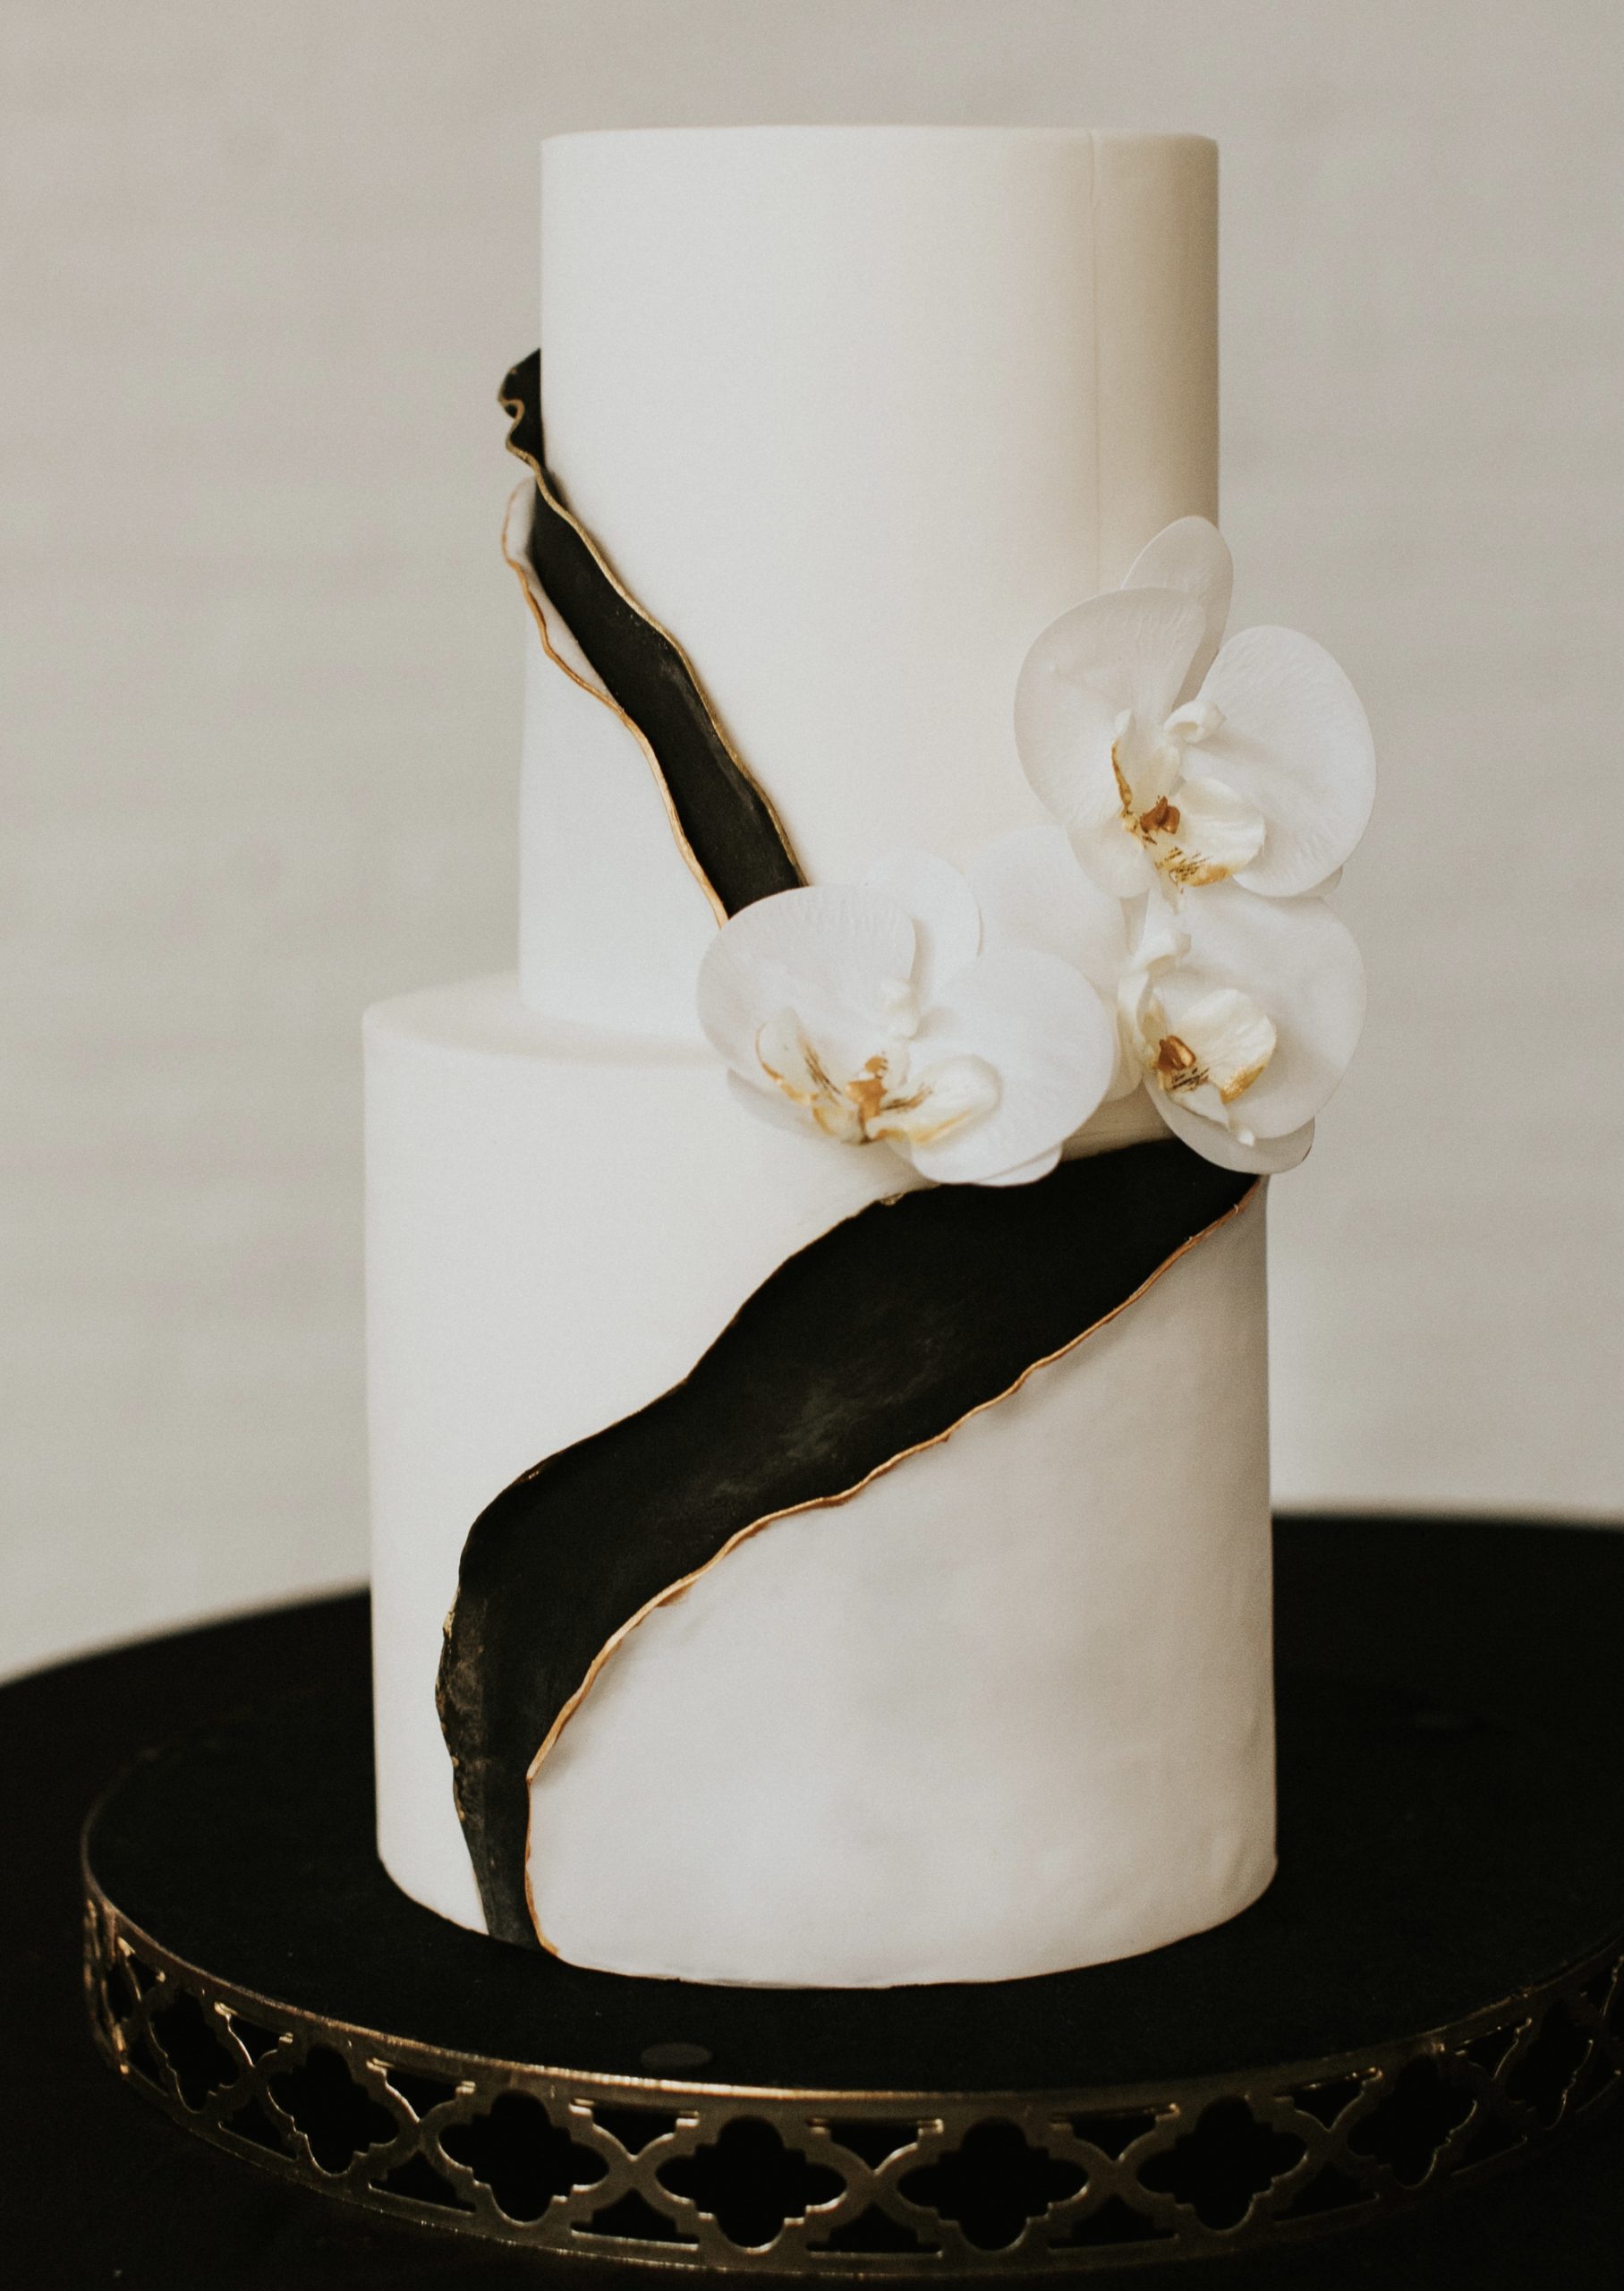 A beautiful 2-tier custom wedding cake with fondant details and live flowers from Village Patisserie in Toledo, Ohio